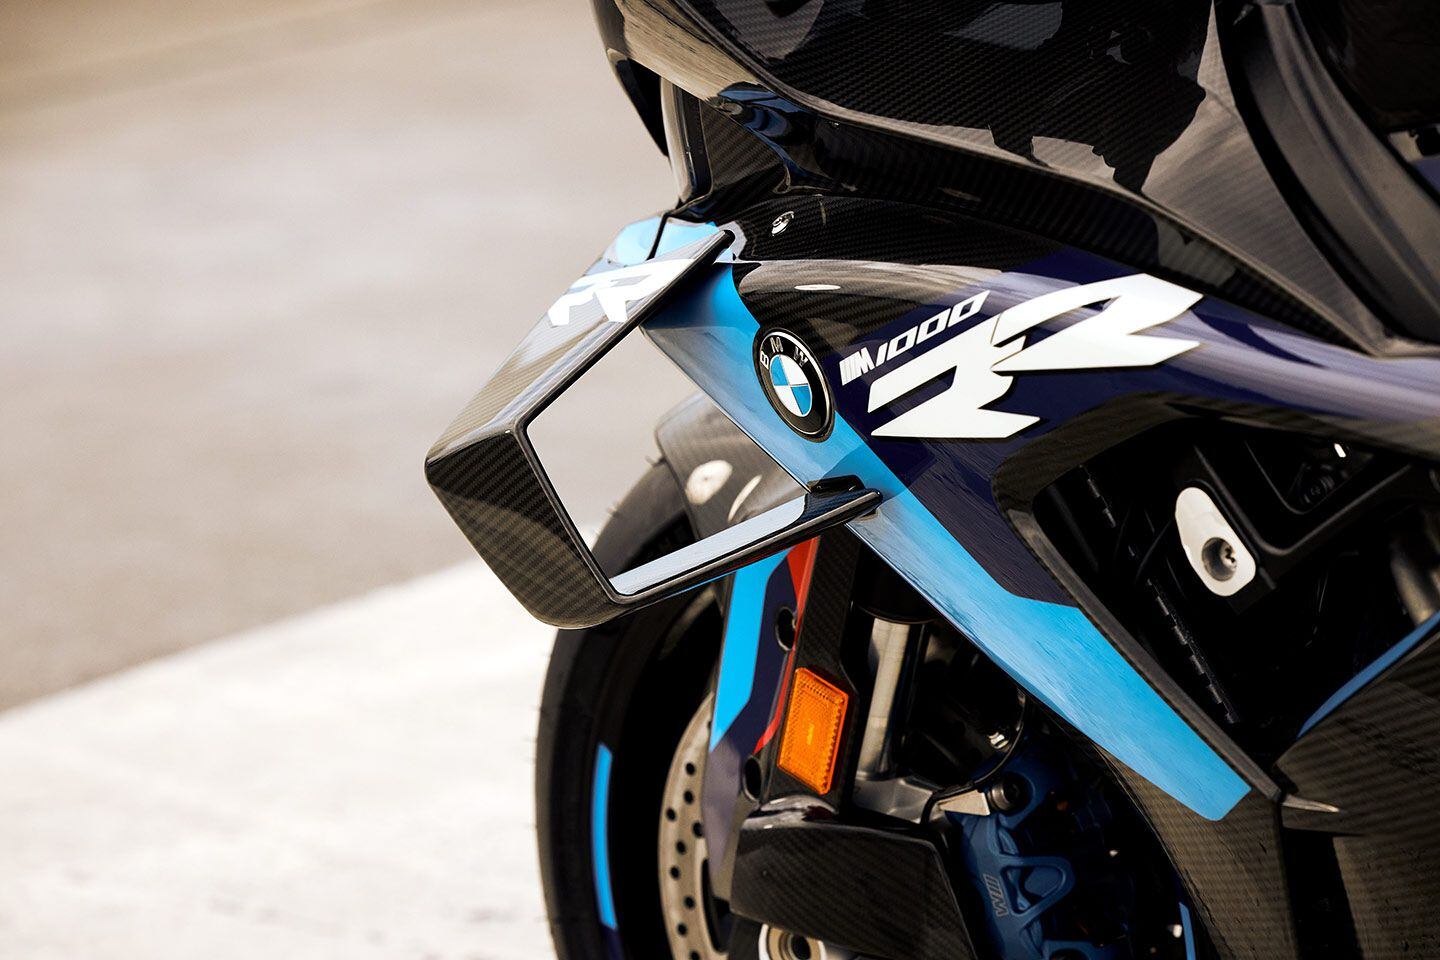 Nearly 50 pounds of downforce are produced by the M 1000 RR’s winglets at 186 mph.